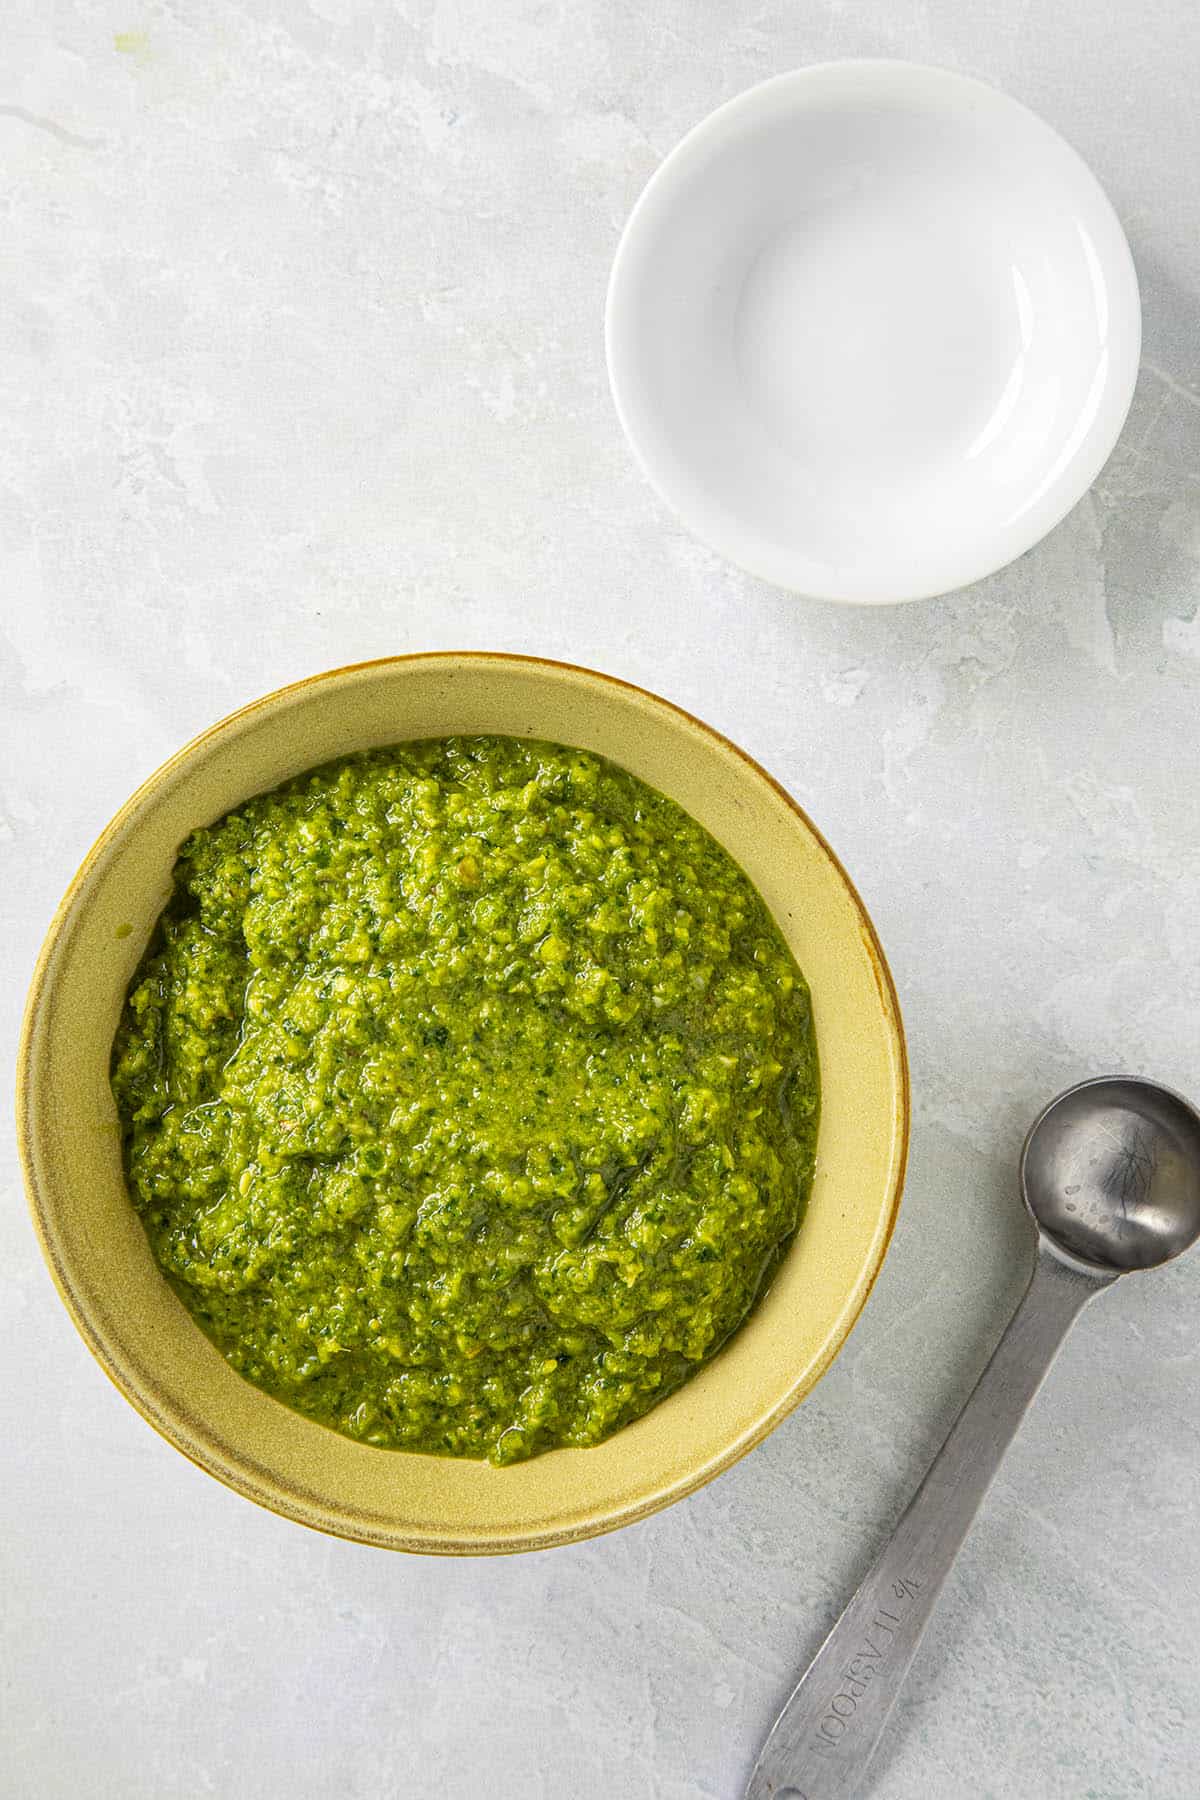 Thick and flavorful Green Curry Paste, ready for curry making